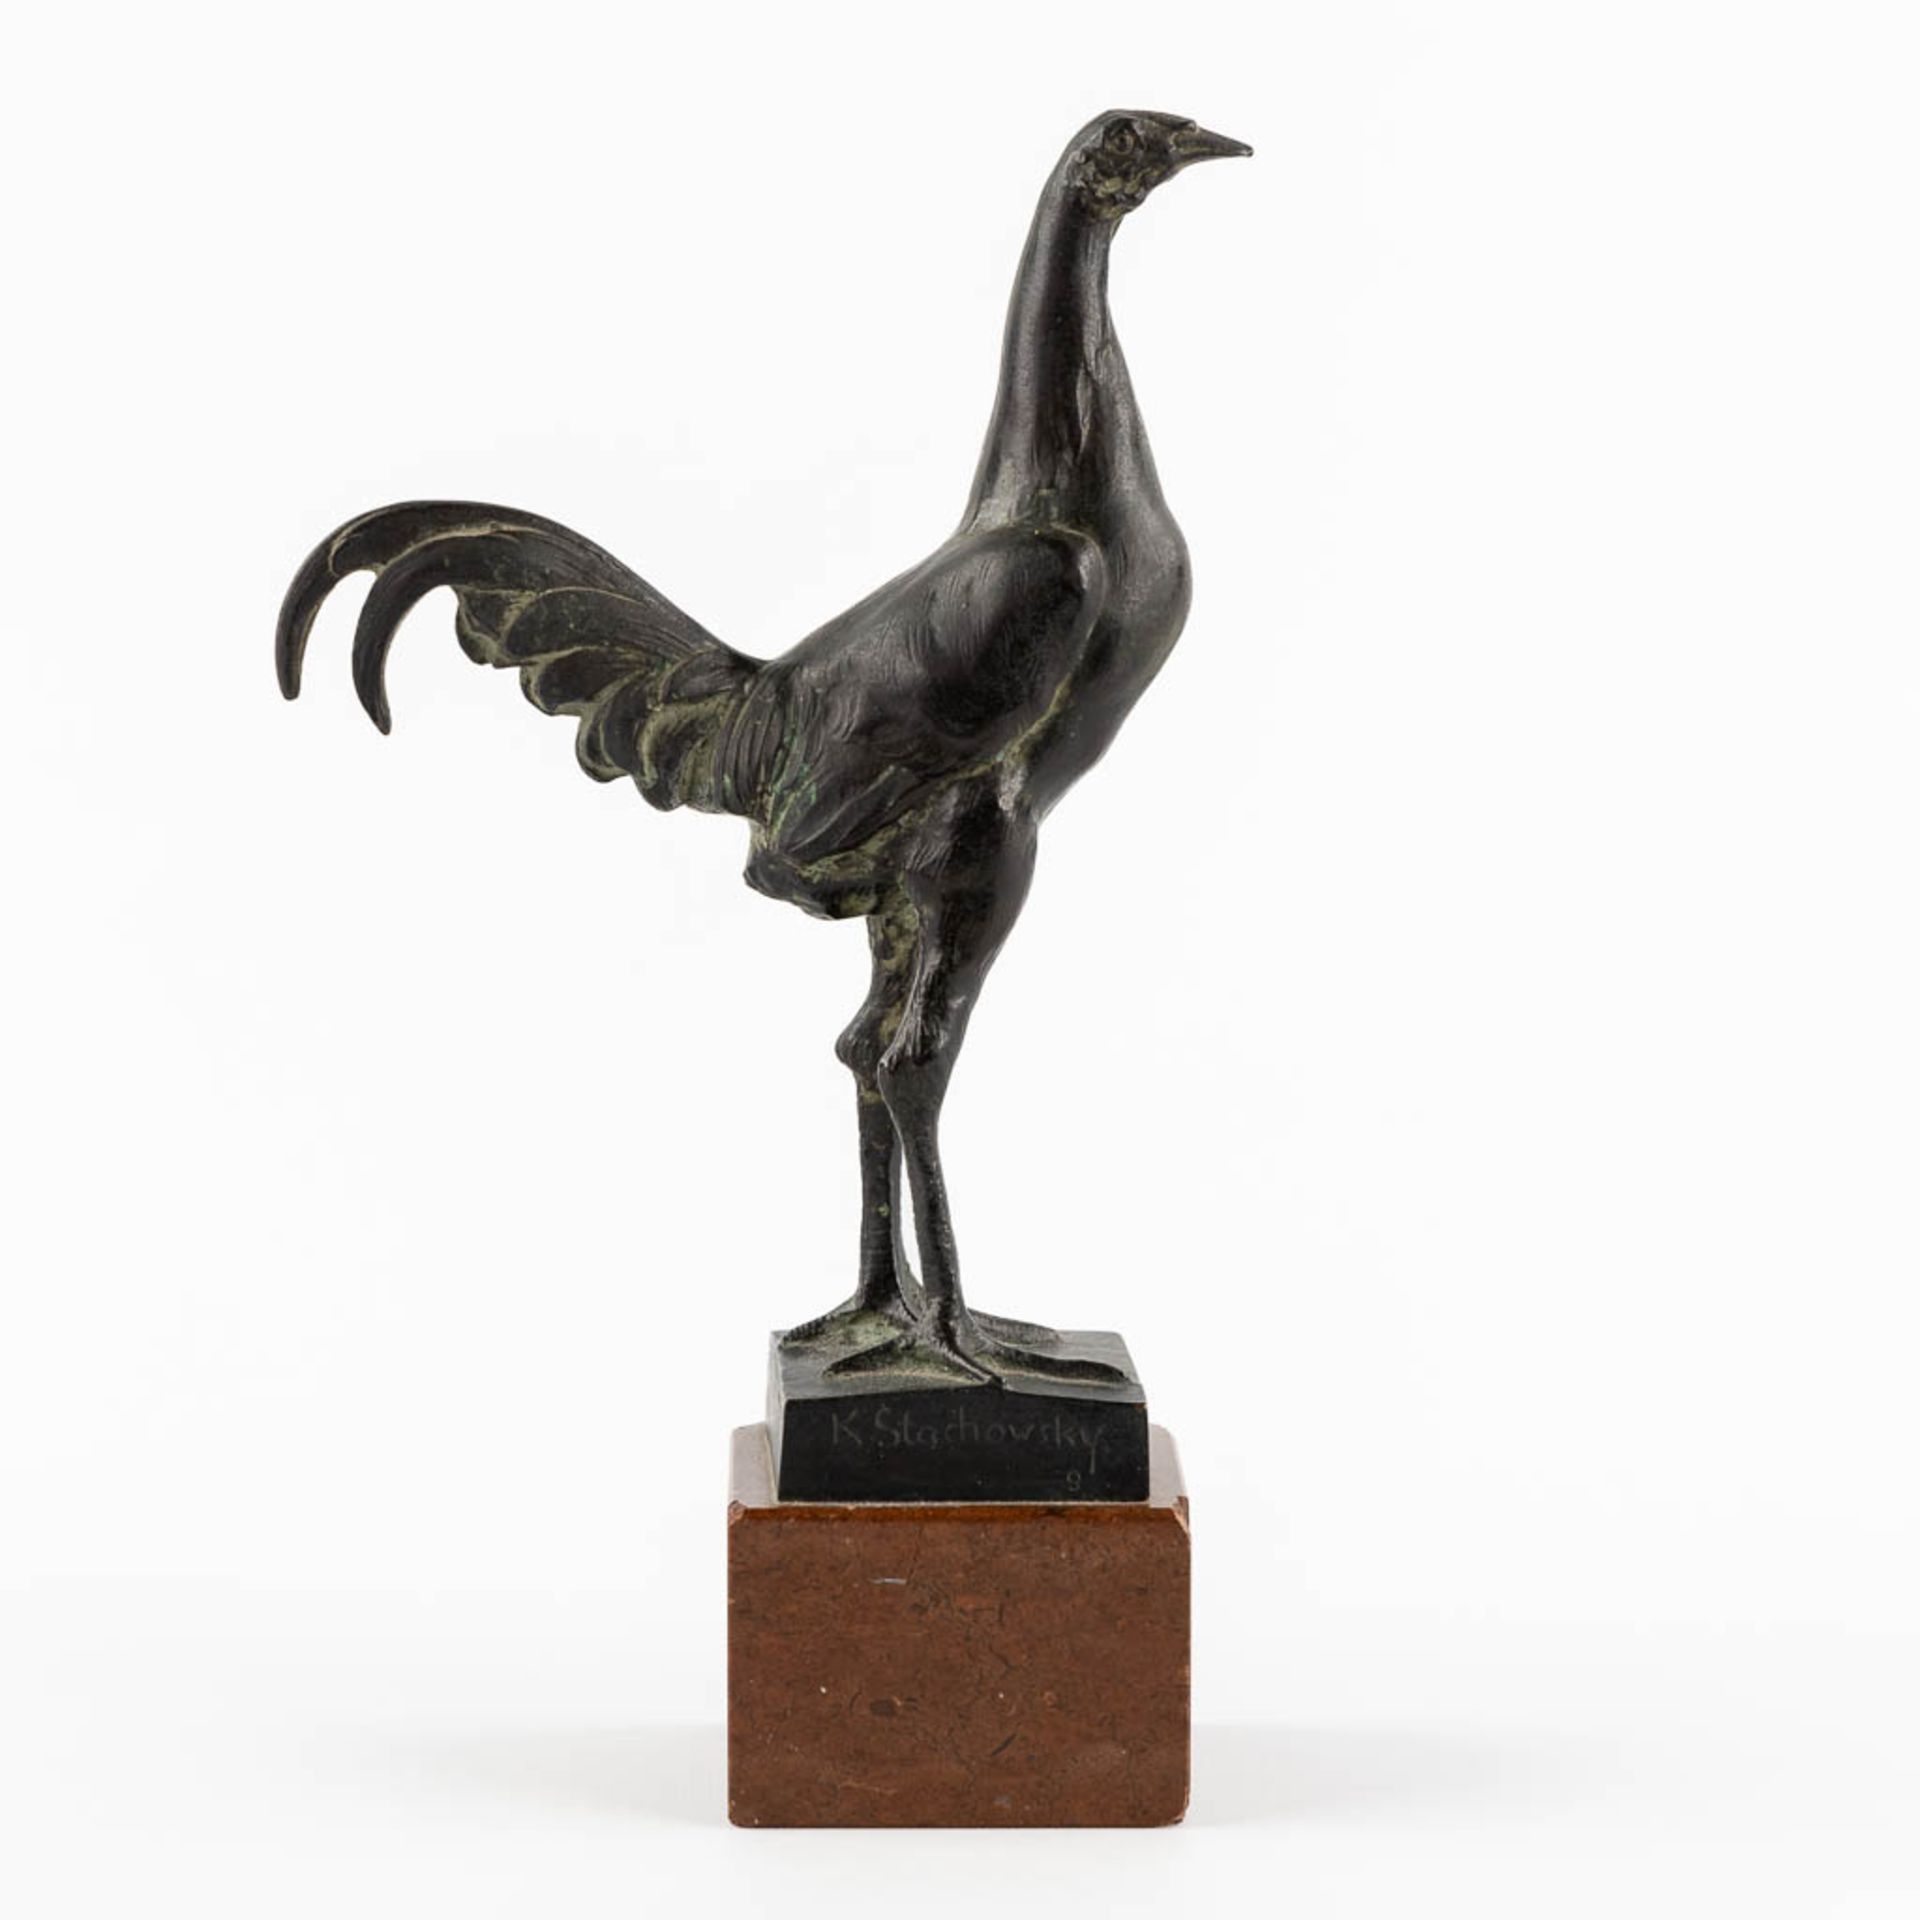 K. STACHOWSKY (XIX-XX) 'Rooster' patinated bronze on marble. (L:15 x W:7 x H:26 cm) - Image 6 of 11